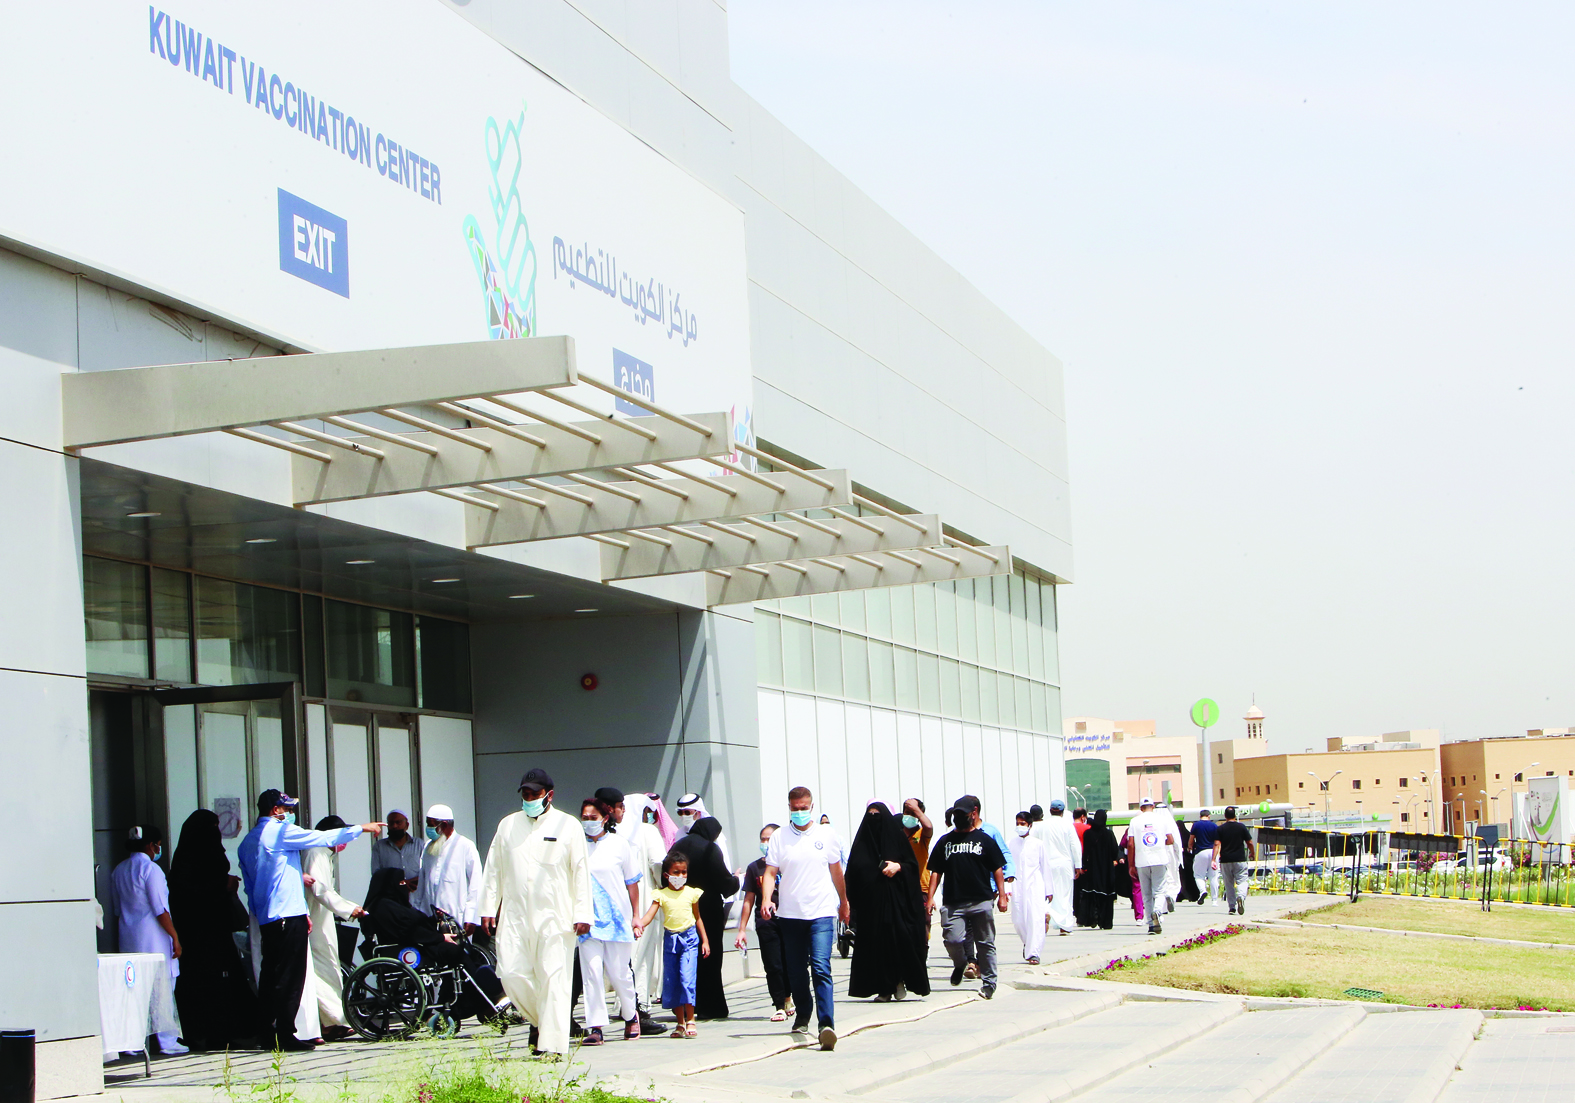 KUWAIT: People arrive to receive a dose of COVID-19 coronavirus vaccine at the make-shift vaccination center at the Kuwait International Fairground in Mishref yesterday. - Photo by Yasser Al-Zayyatn